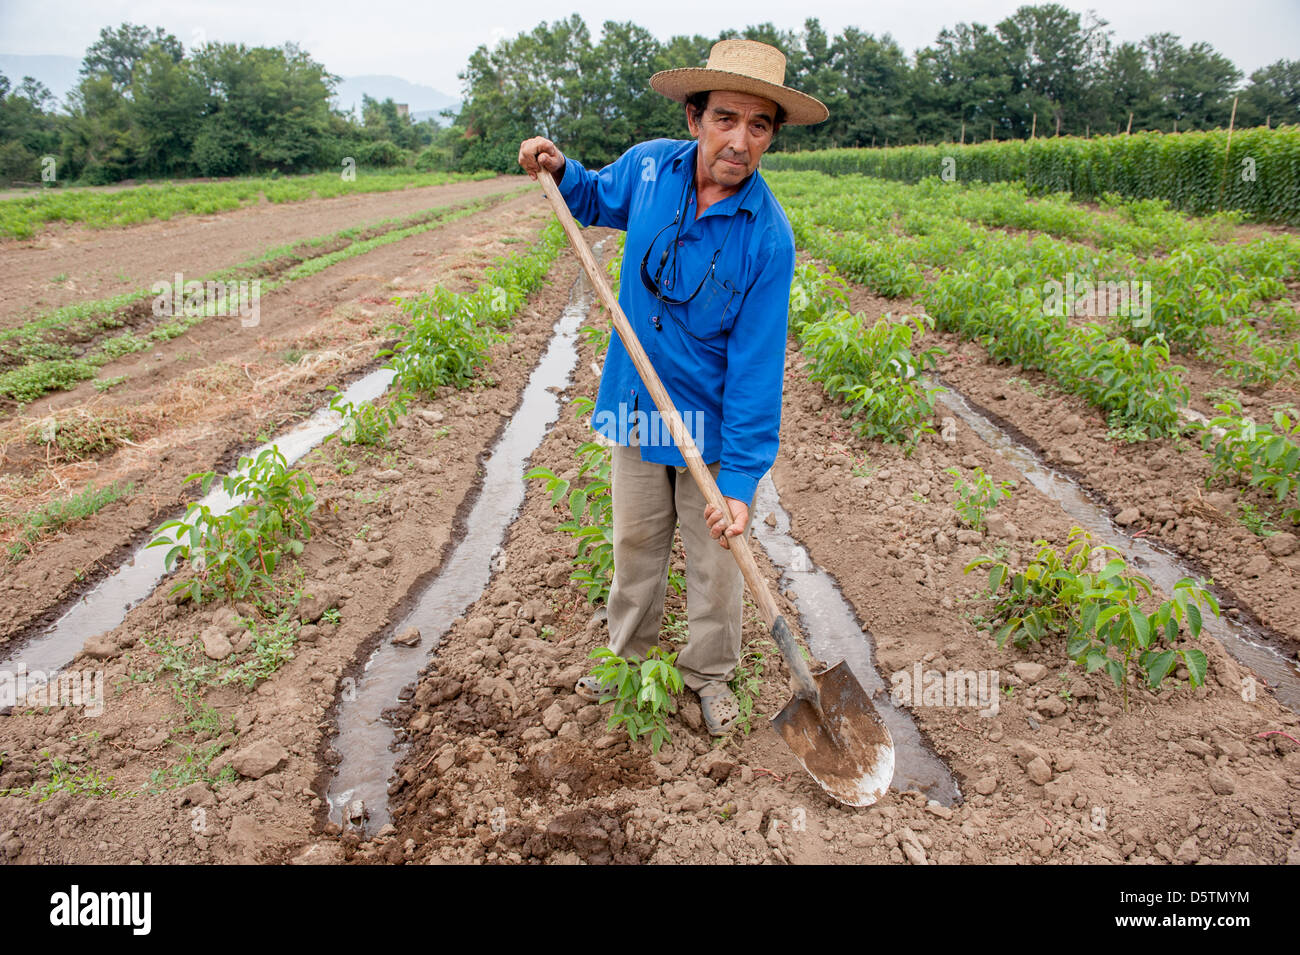 Farm worker tending flood irrigation on a fruit tree nursery in Chile, South America  Stock Photo